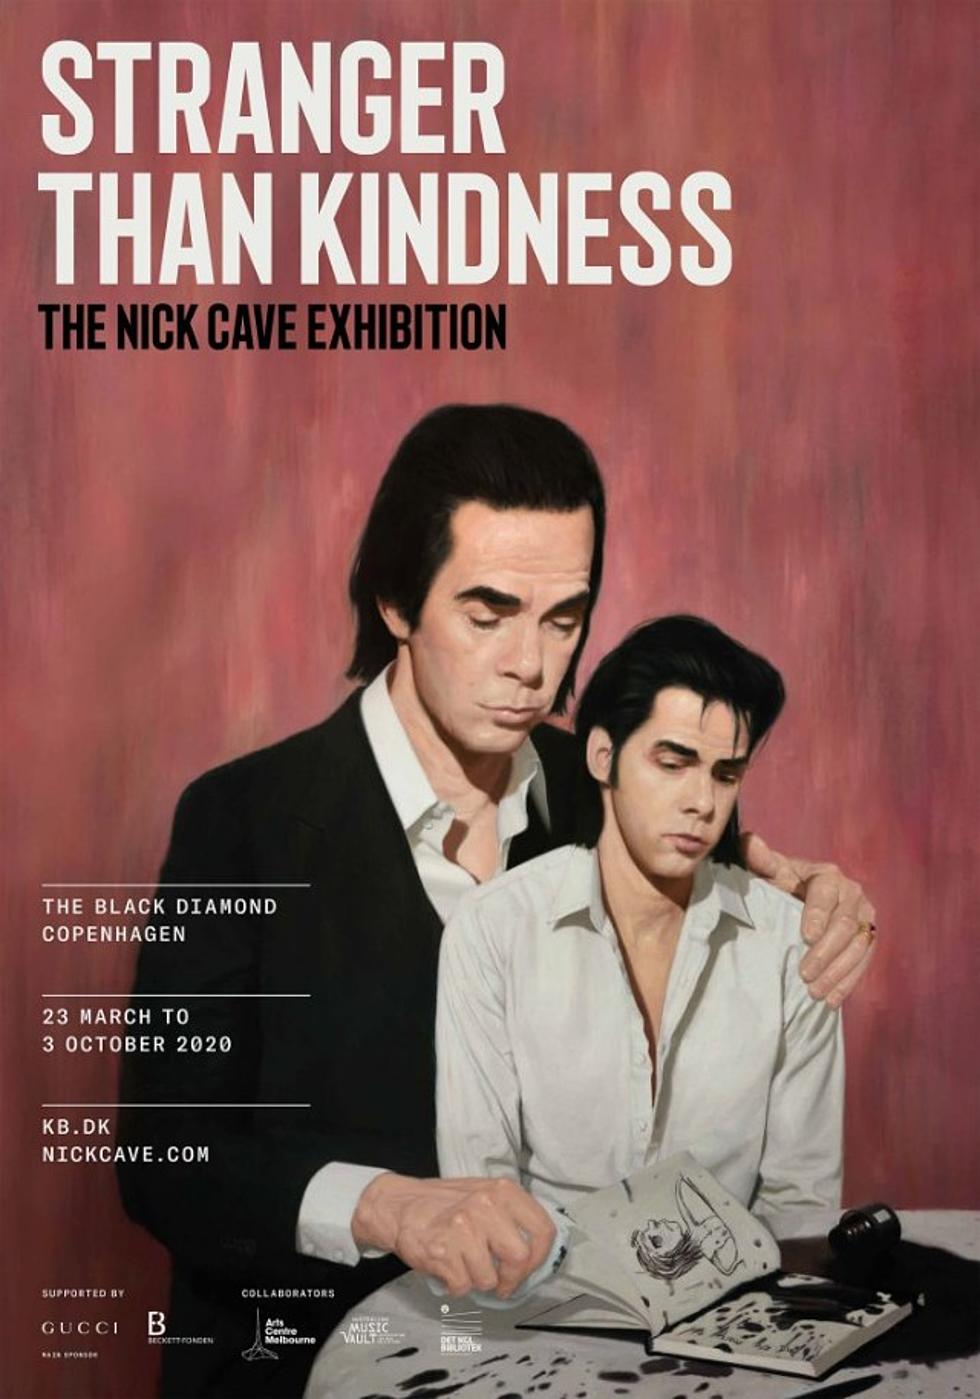 Nick Cave announces new autobiography and exhibition, &#8216;Stranger Than Kindness&#8217;